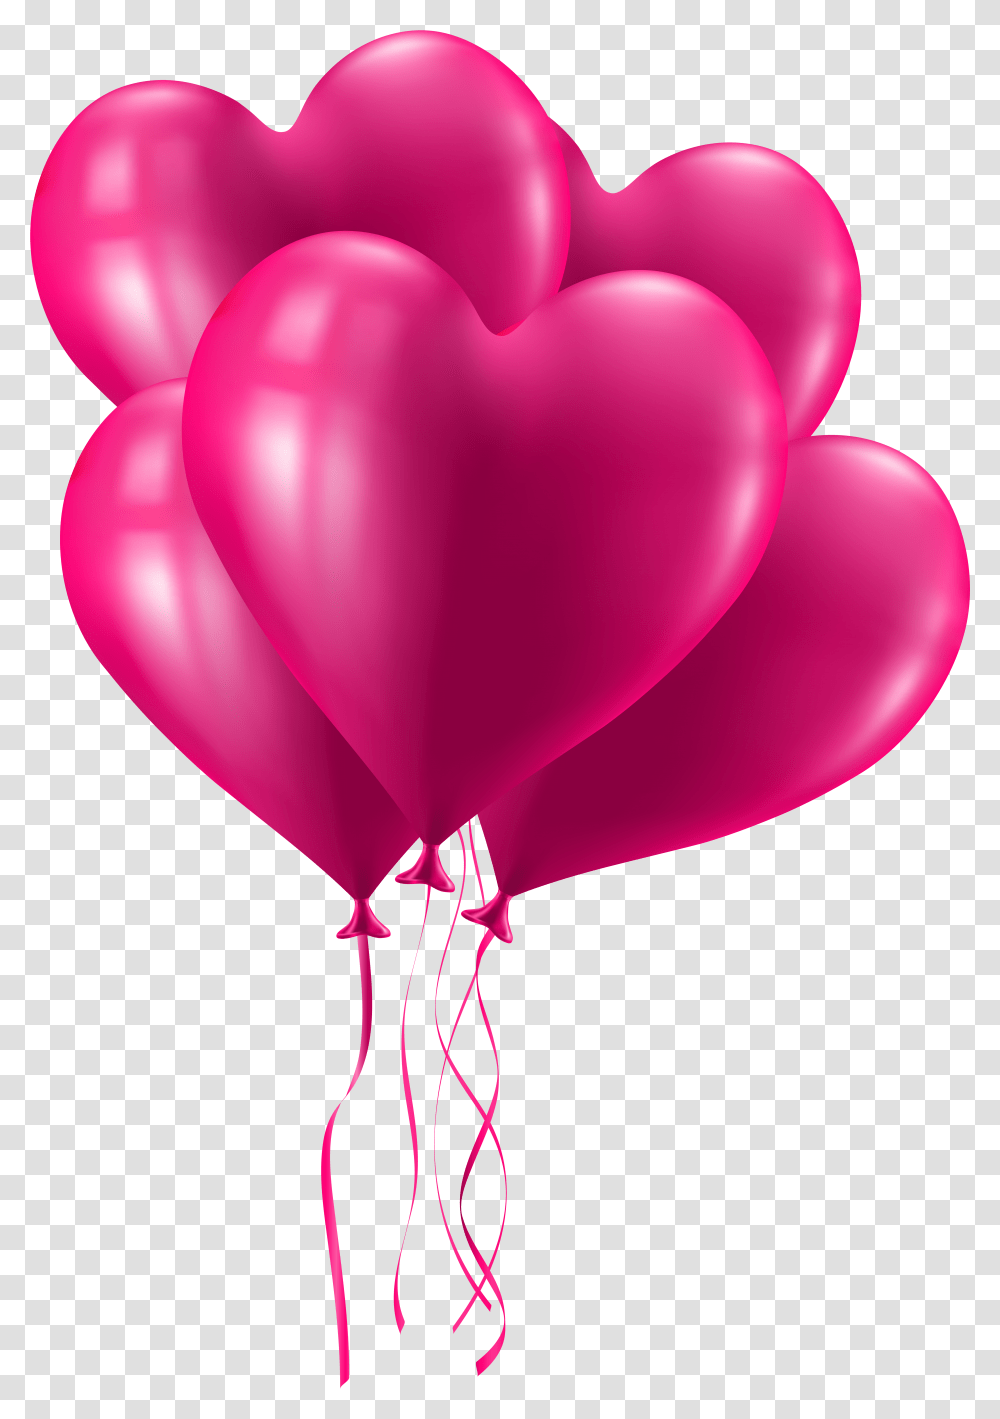 Valentine's Day Pink Heart Balloons Clip Art Image Pink Balloons Transparent Png